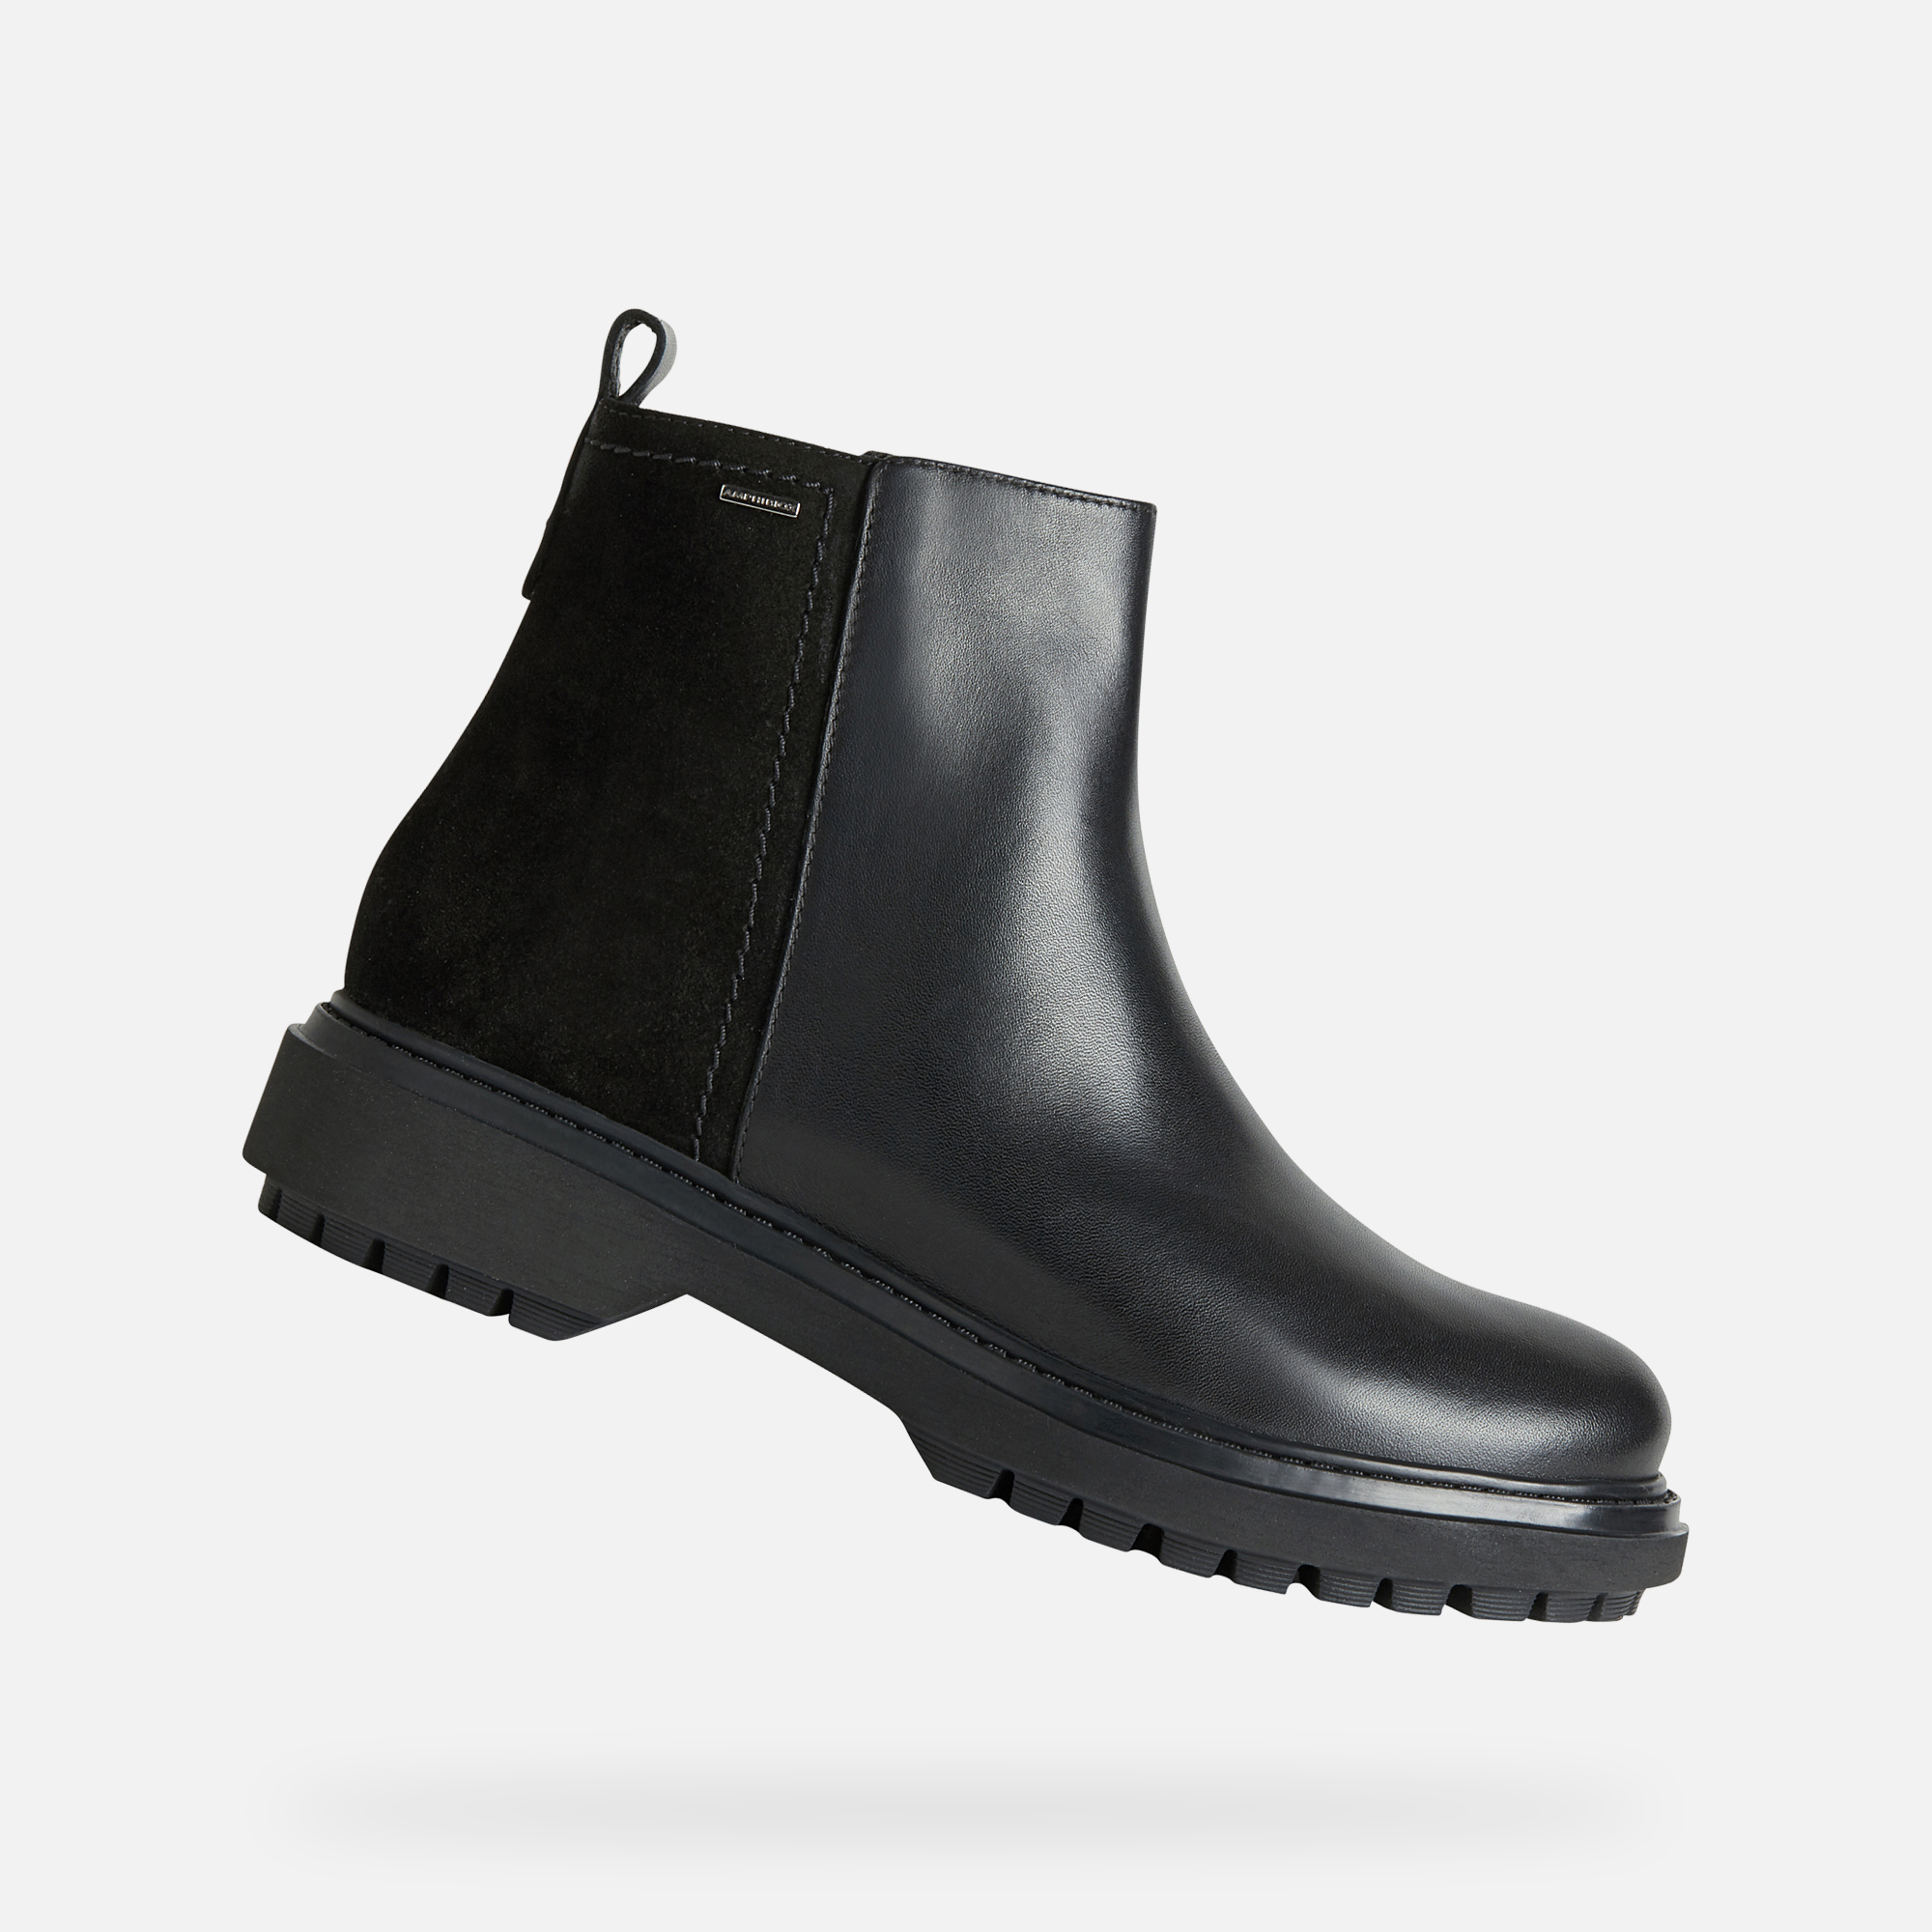 Geox® ASHEELY NP ABX Woman: Black Ankle Boots | Geox® Online